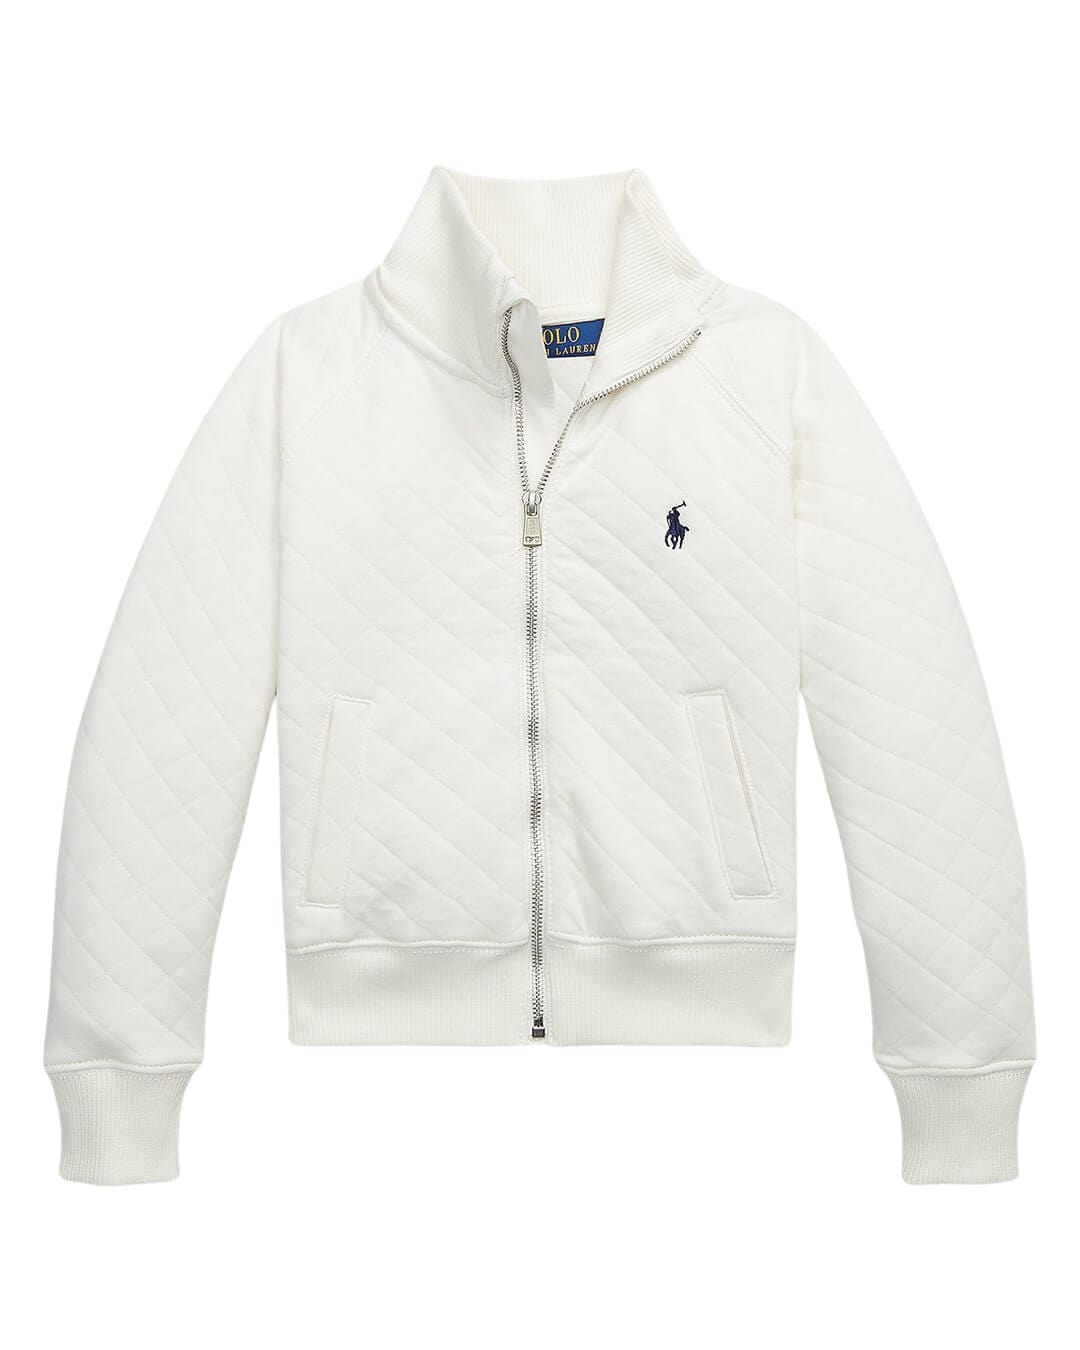 Polo Ralph Lauren Jumpers Girls Polo Ralph Lauren White Quilted Jacquard Jacket